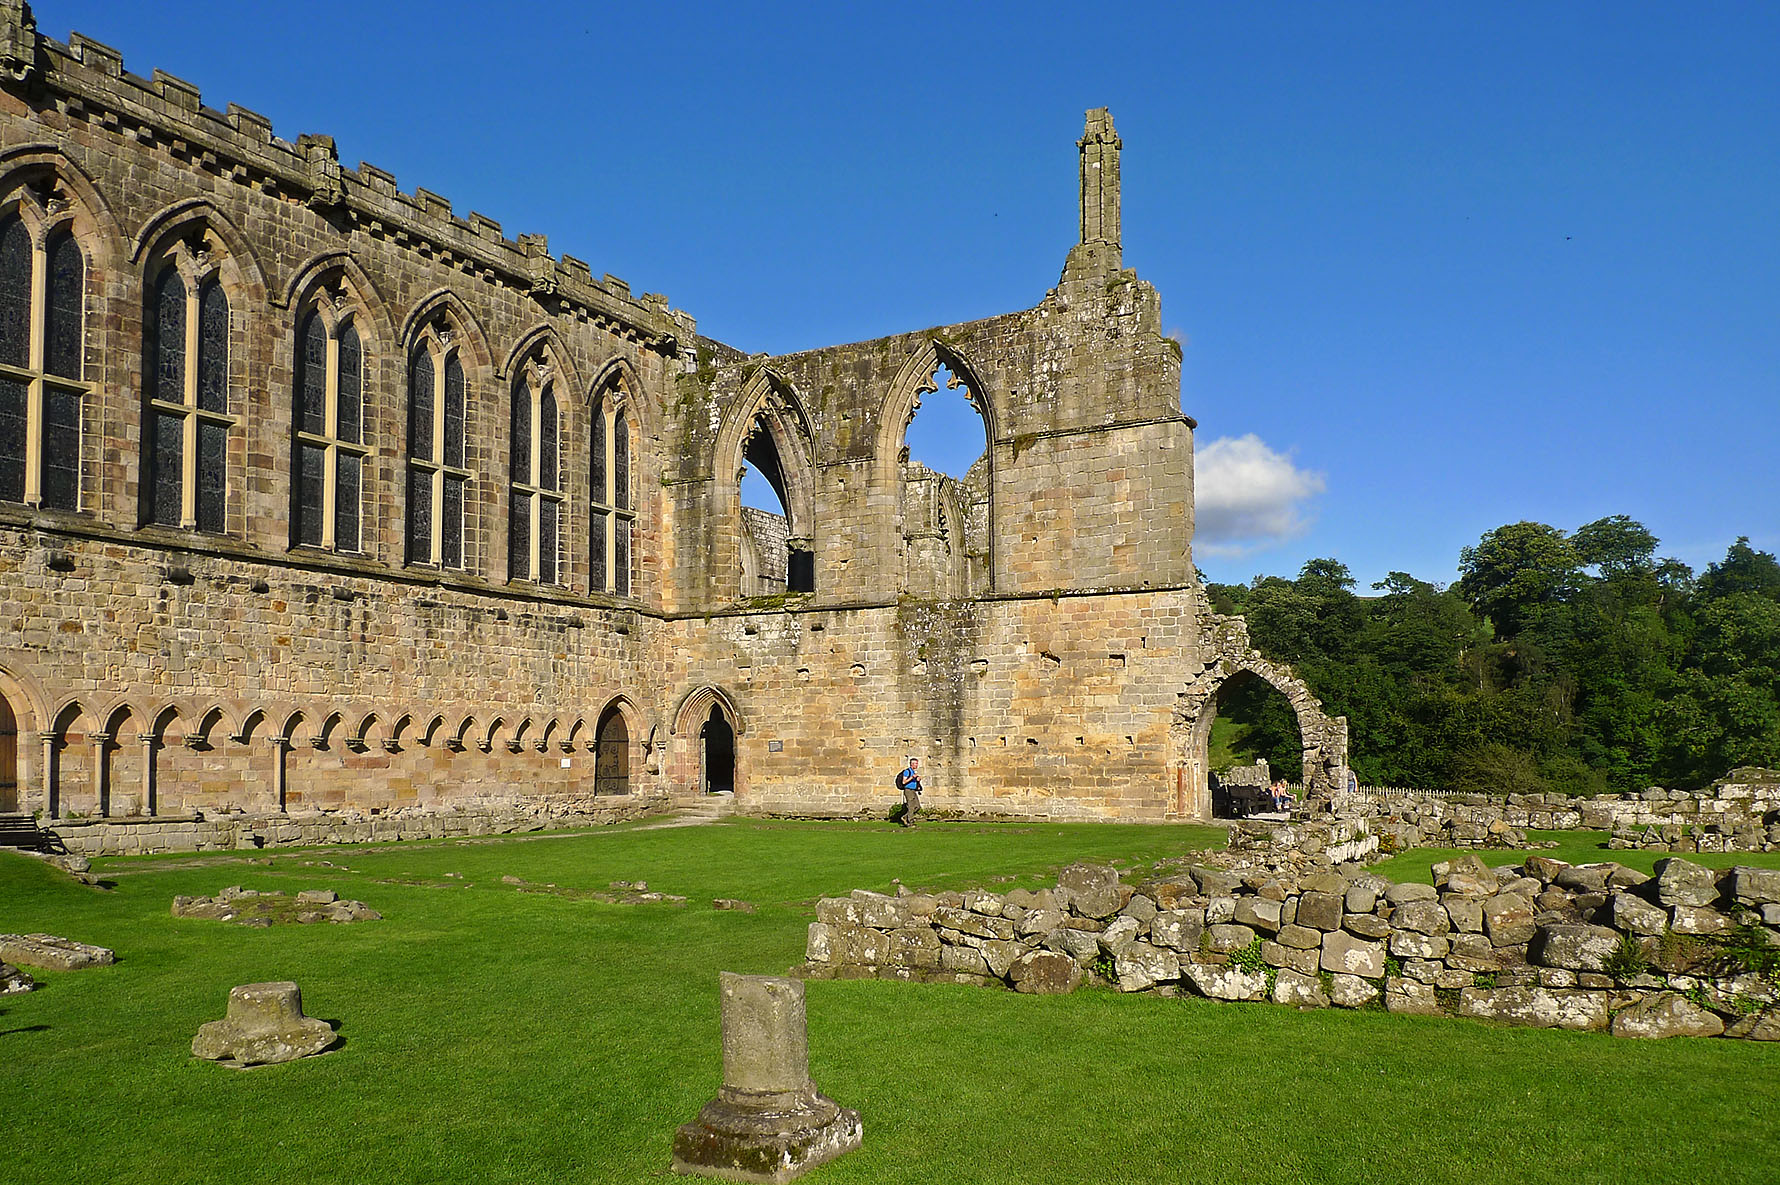 Nice Images Collection: Bolton Priory Desktop Wallpapers